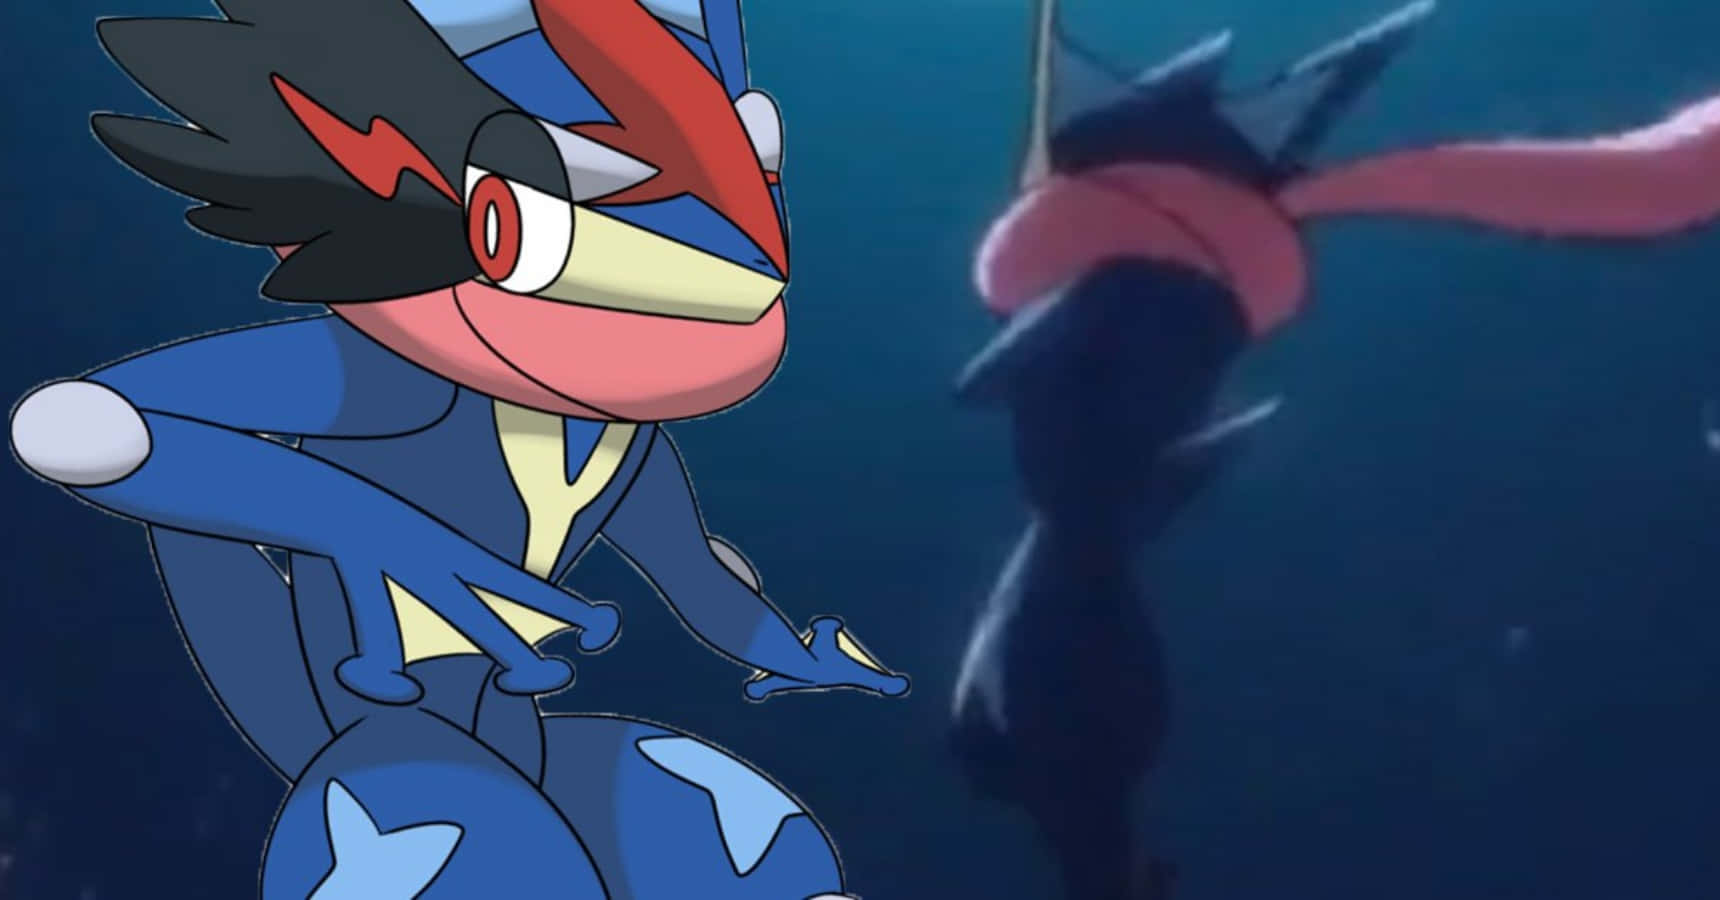 Dive into a world of possibilities with Greninja